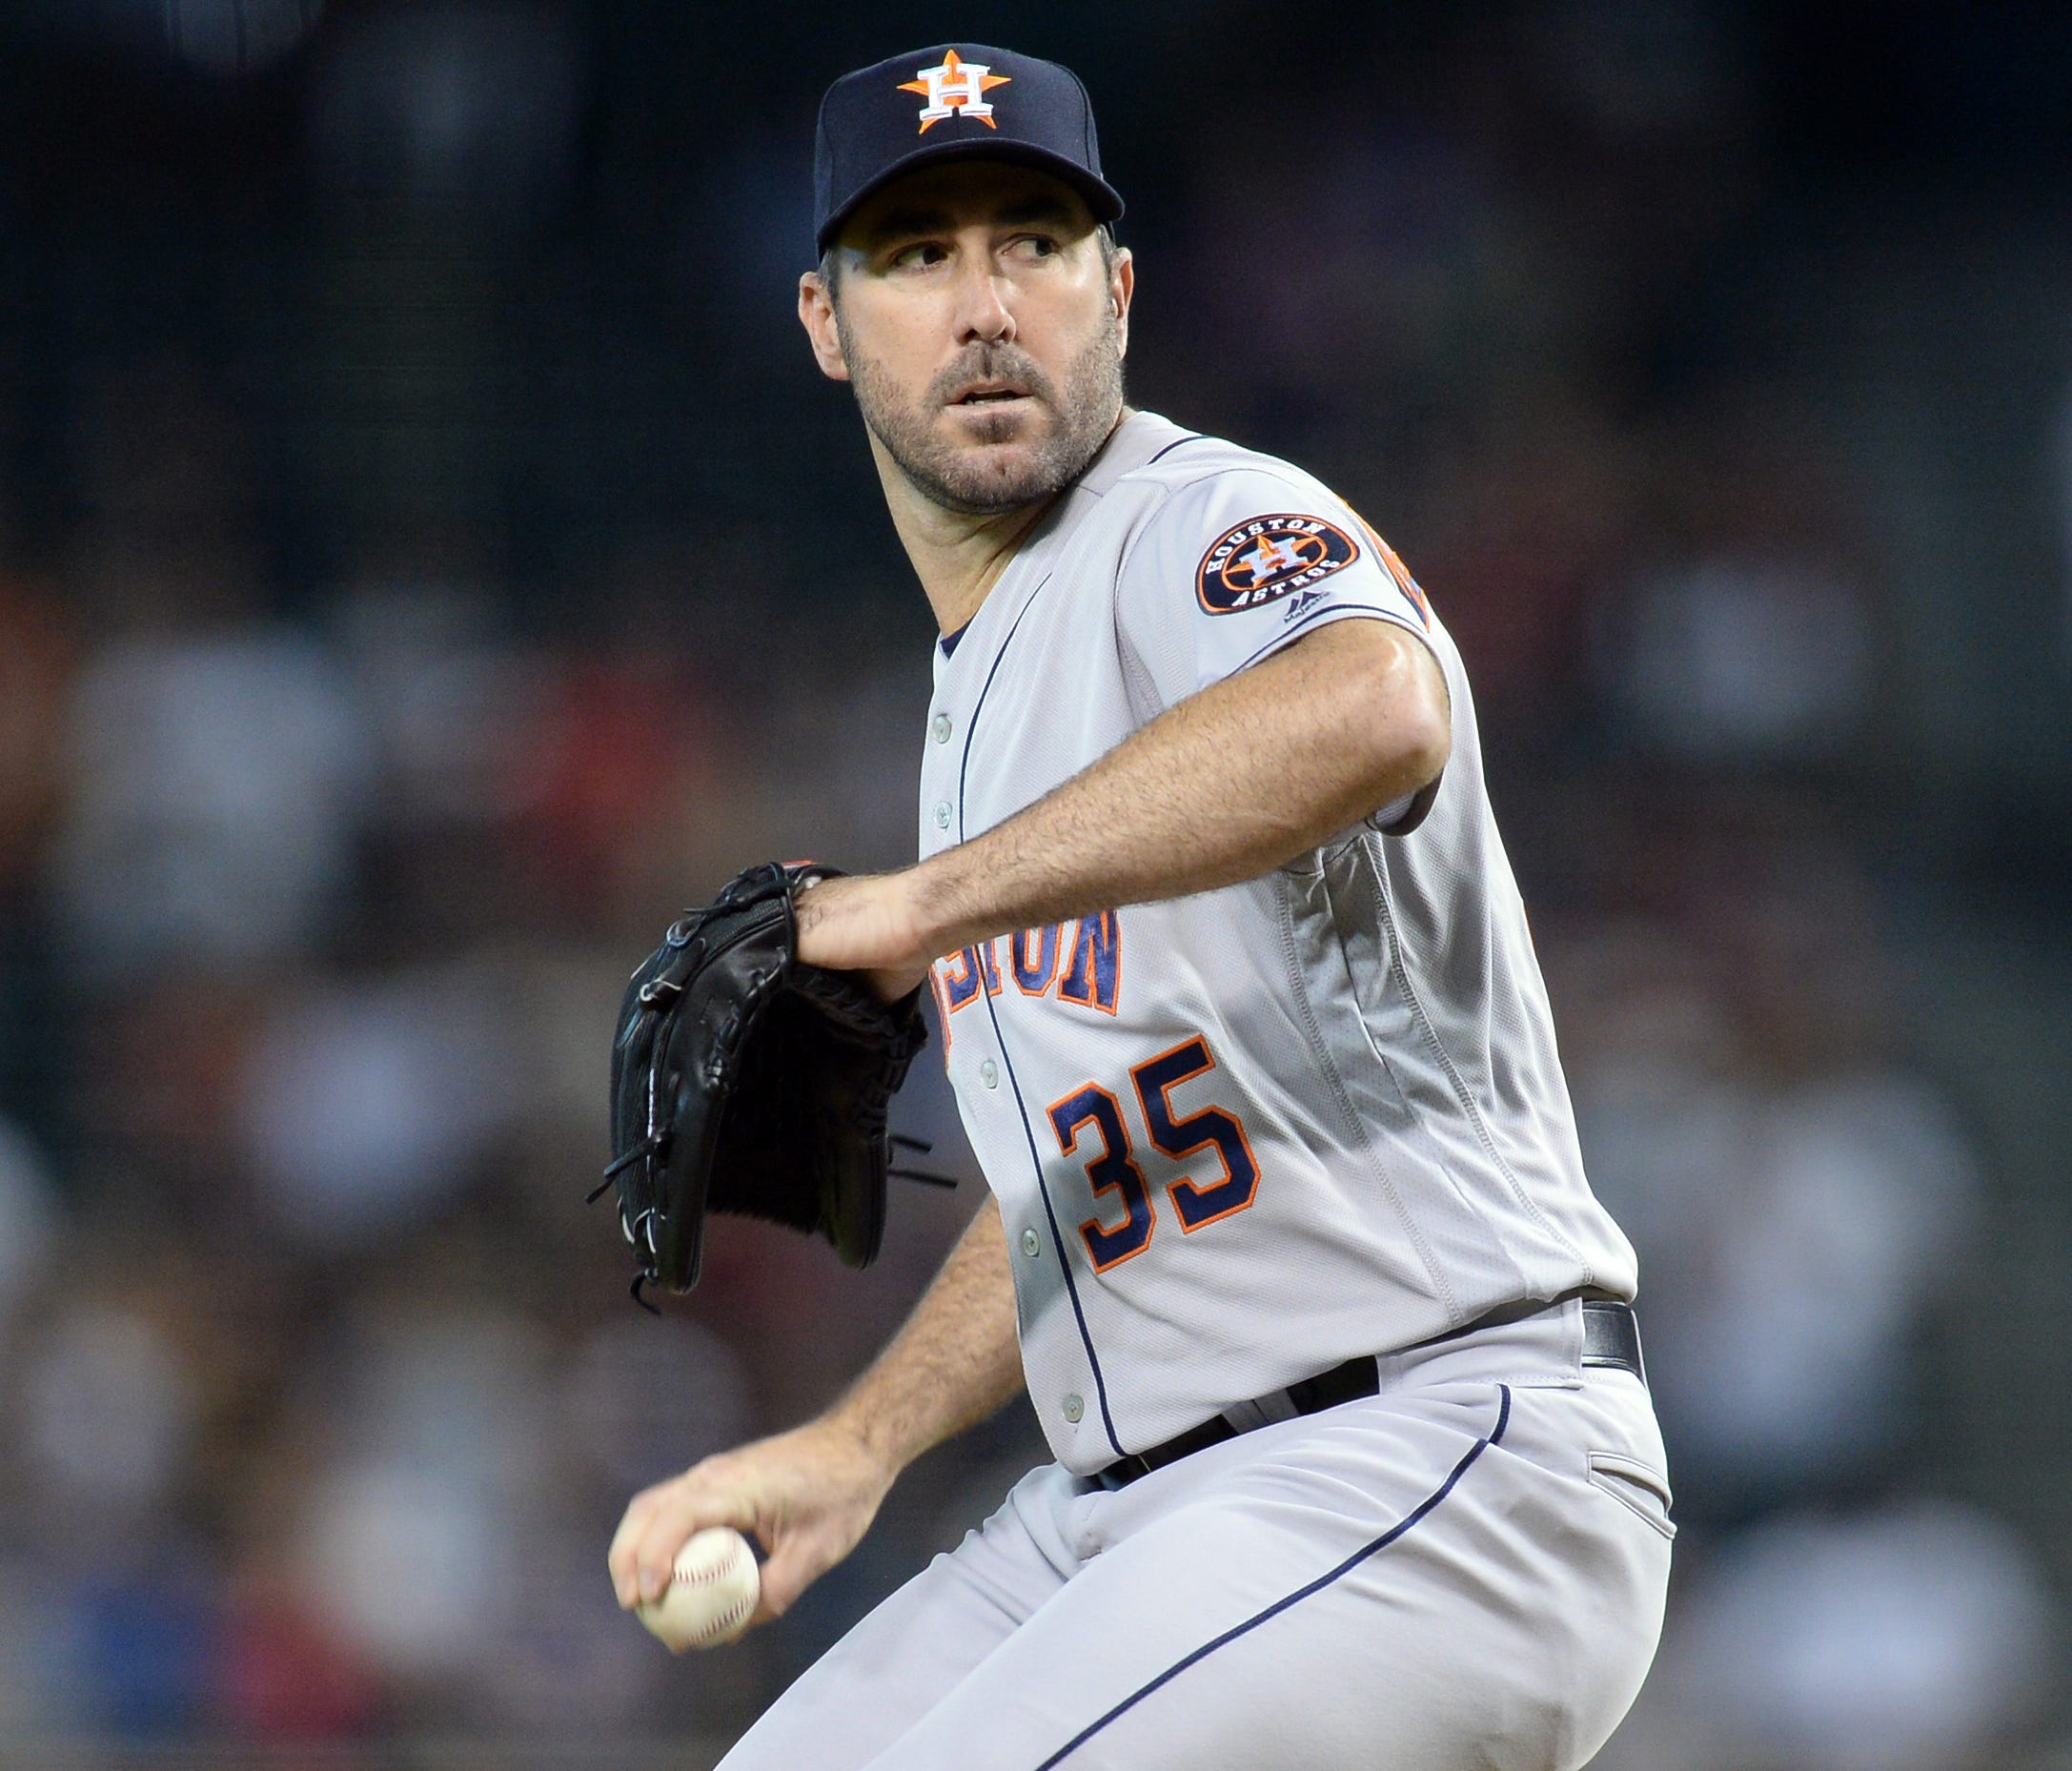 Justin Verlander is 7-2 this season with the Astros.